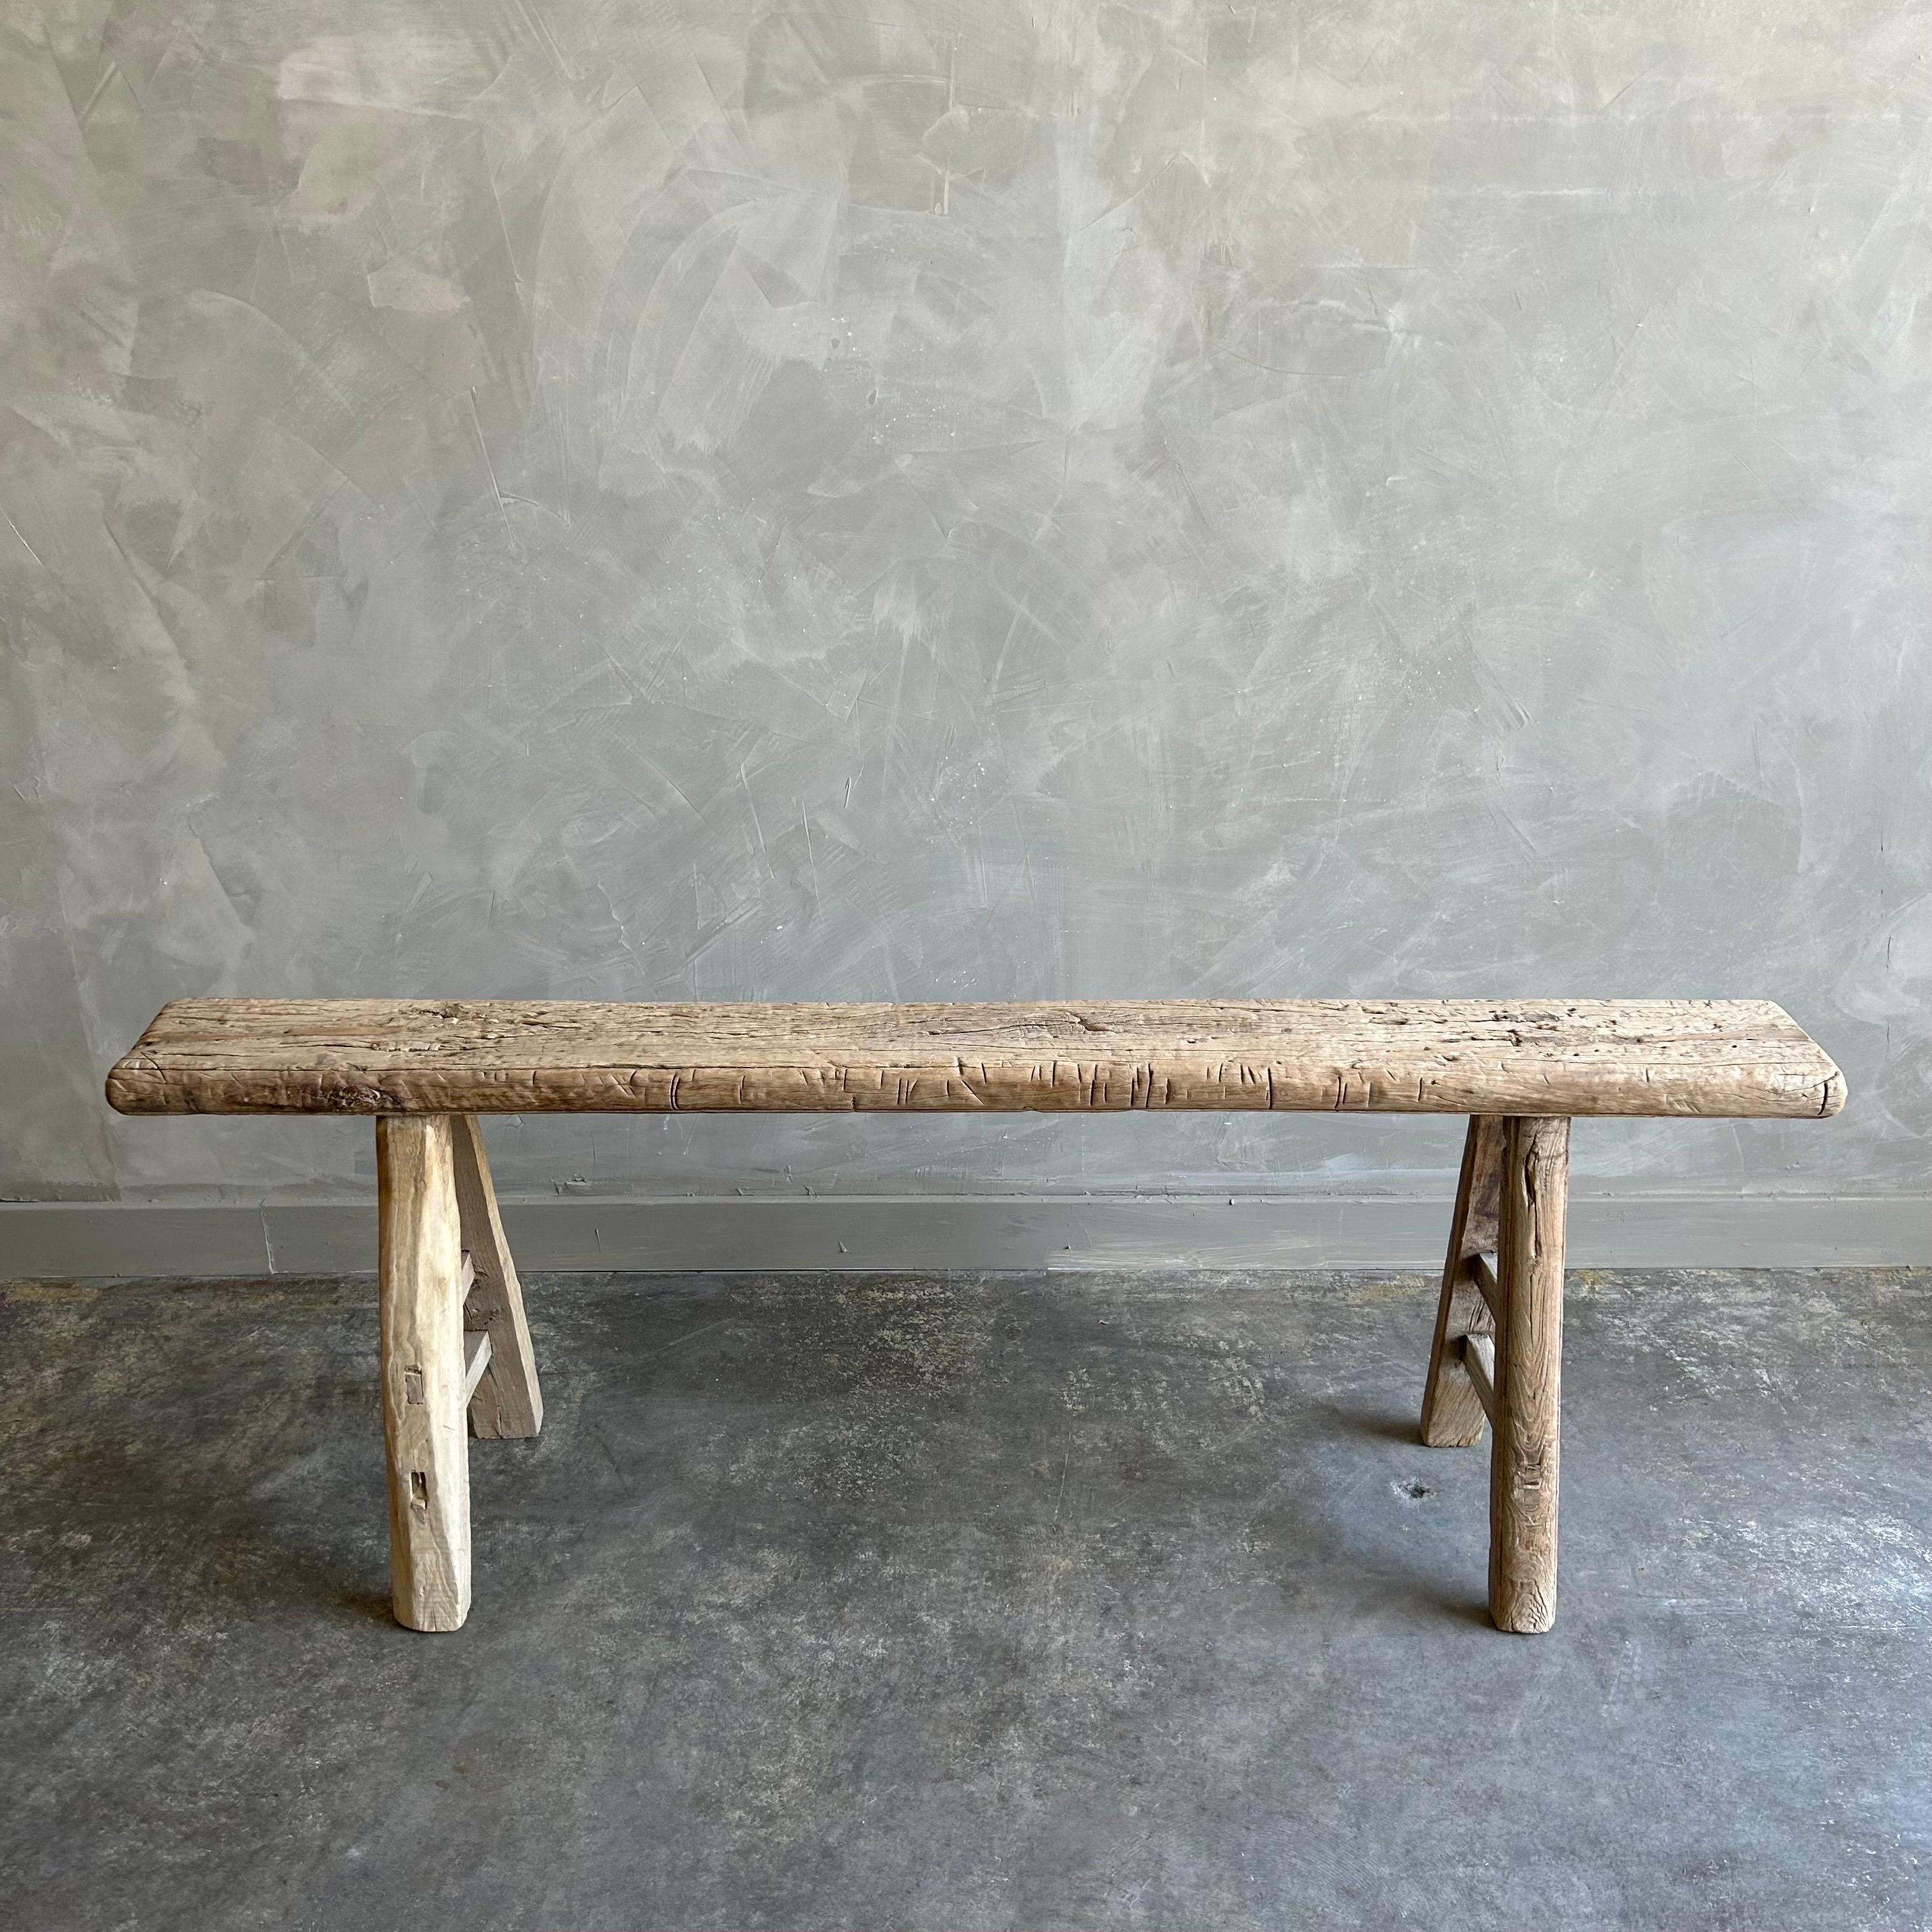 Bloom Home inc has over 2000 items in stock ready for immediate shipping, scroll down to view all of our items!
Elm skinny bench 55”w x 12”d x 20”h
SD:6”
Vintage antique elm wood skinny bench. These are the real vintage antique elm wood benches!